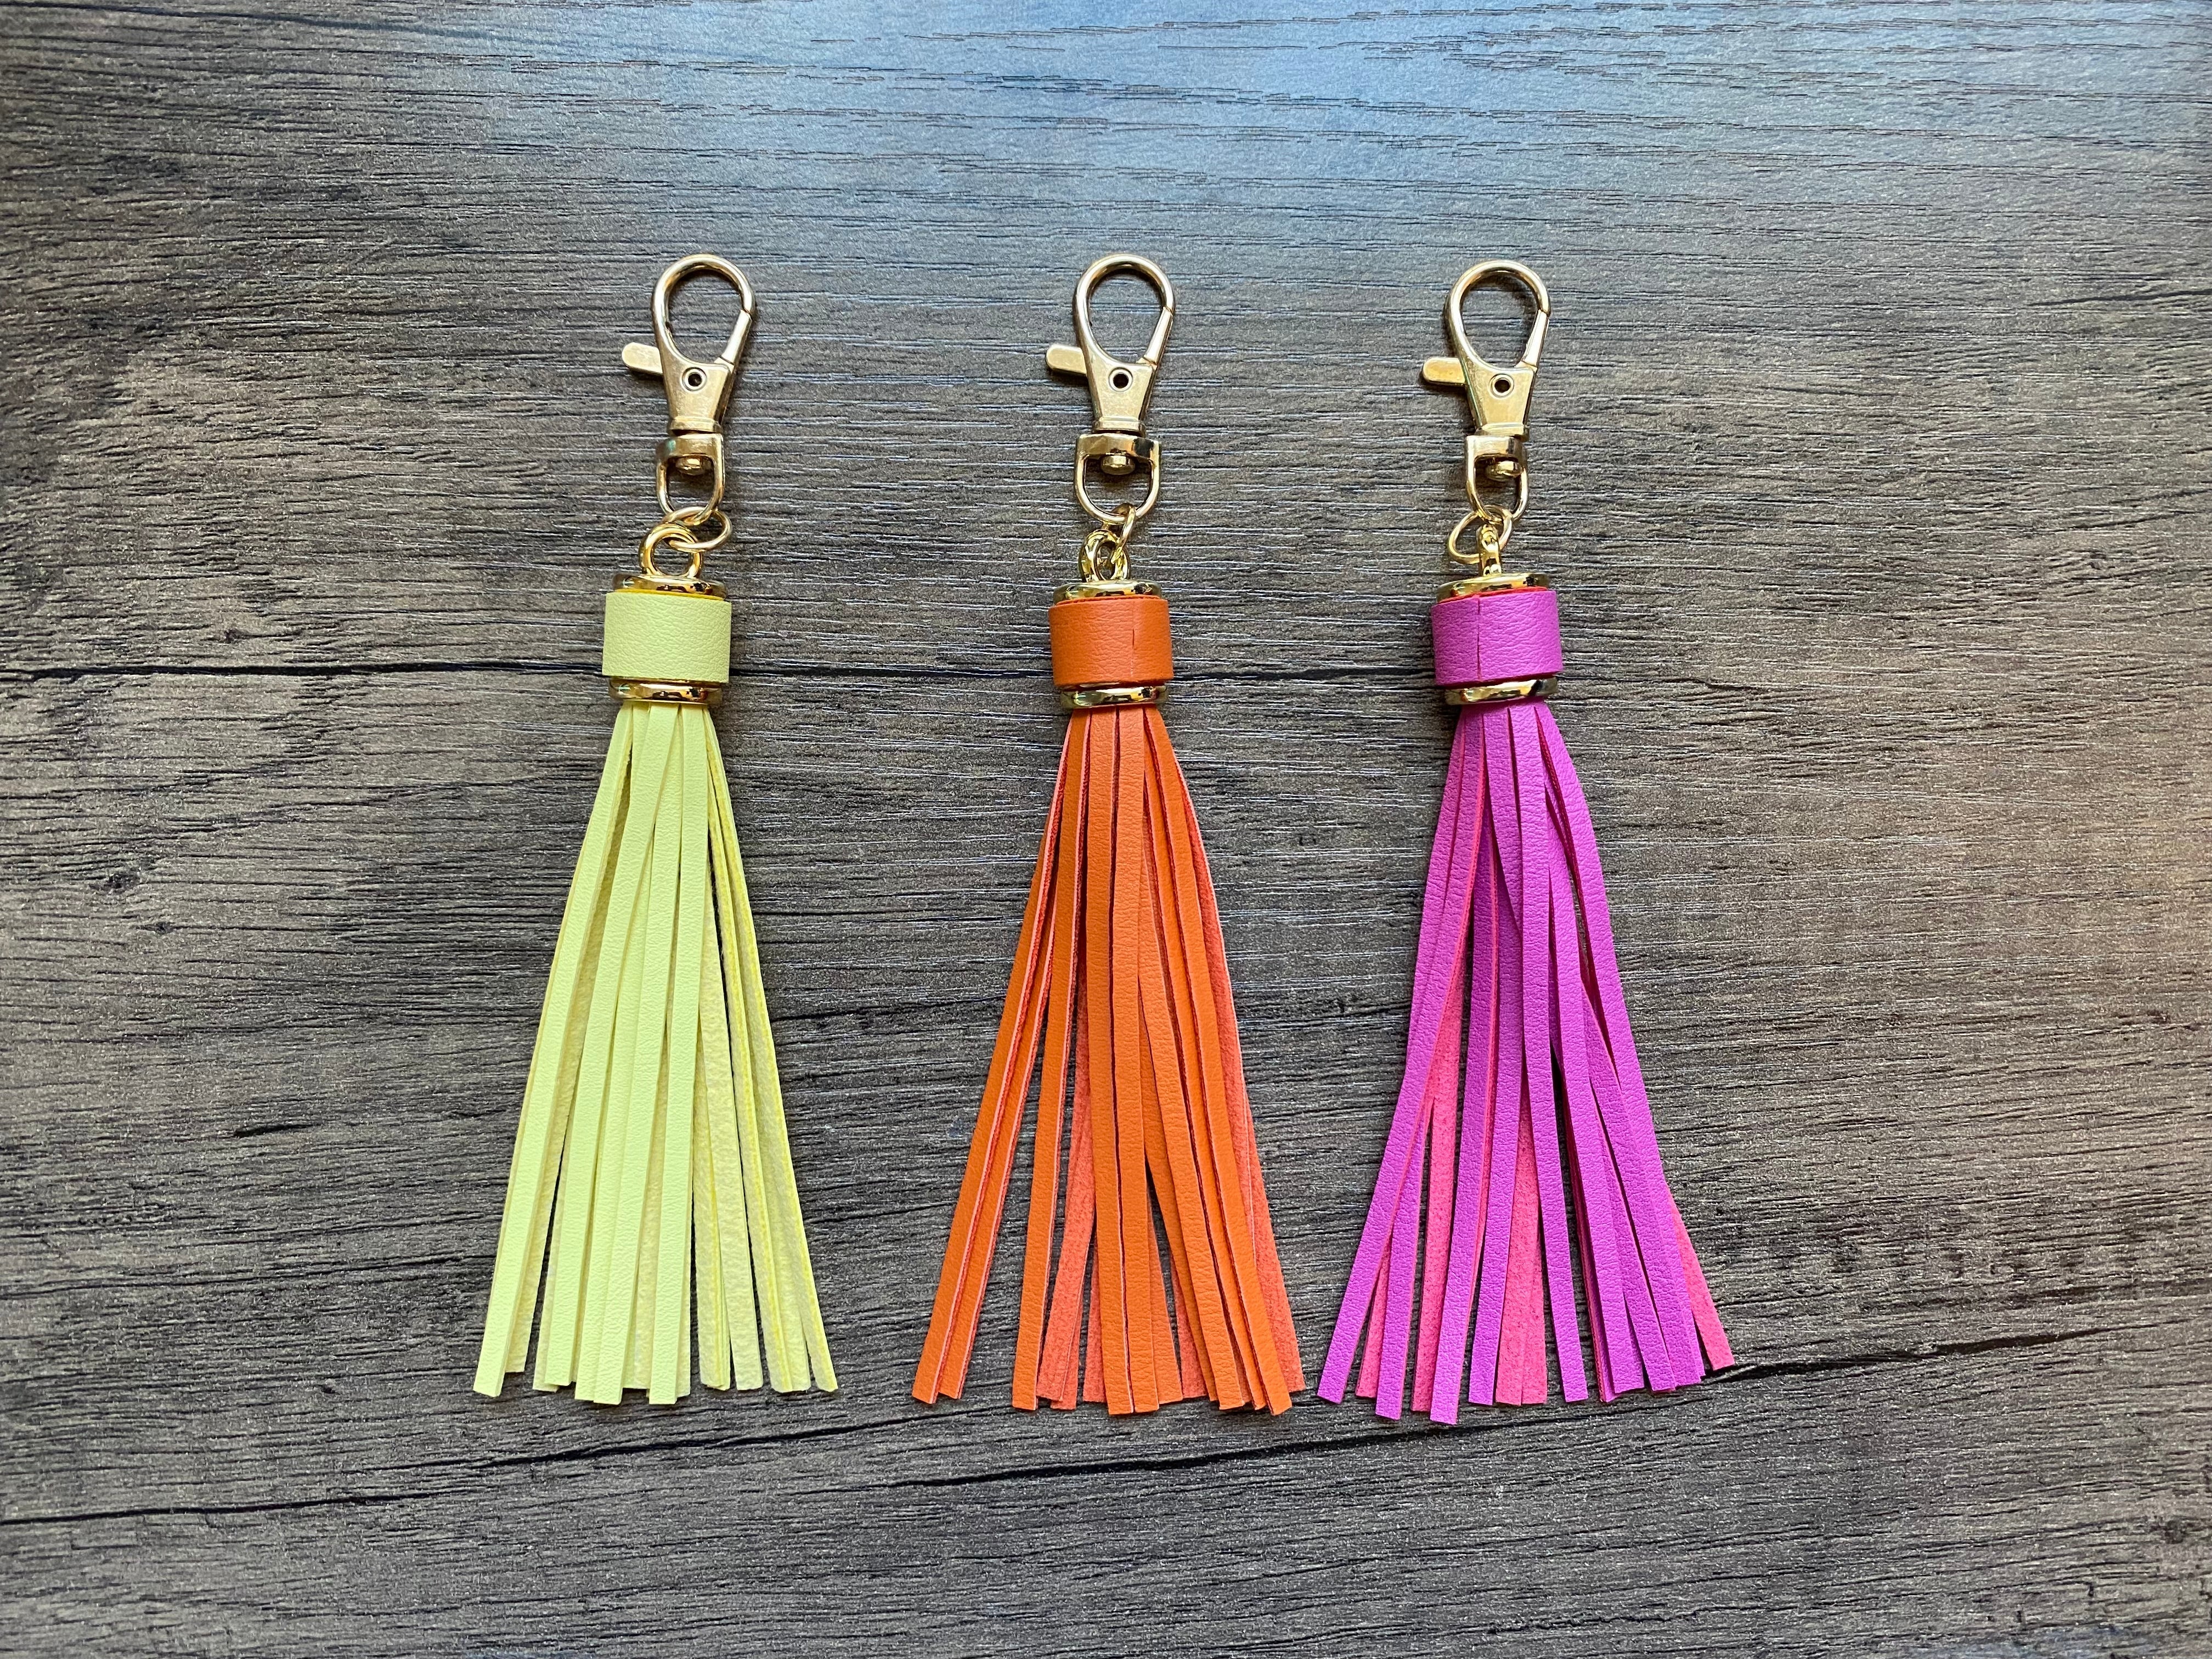 Colorful Leather Feeling Key Chain